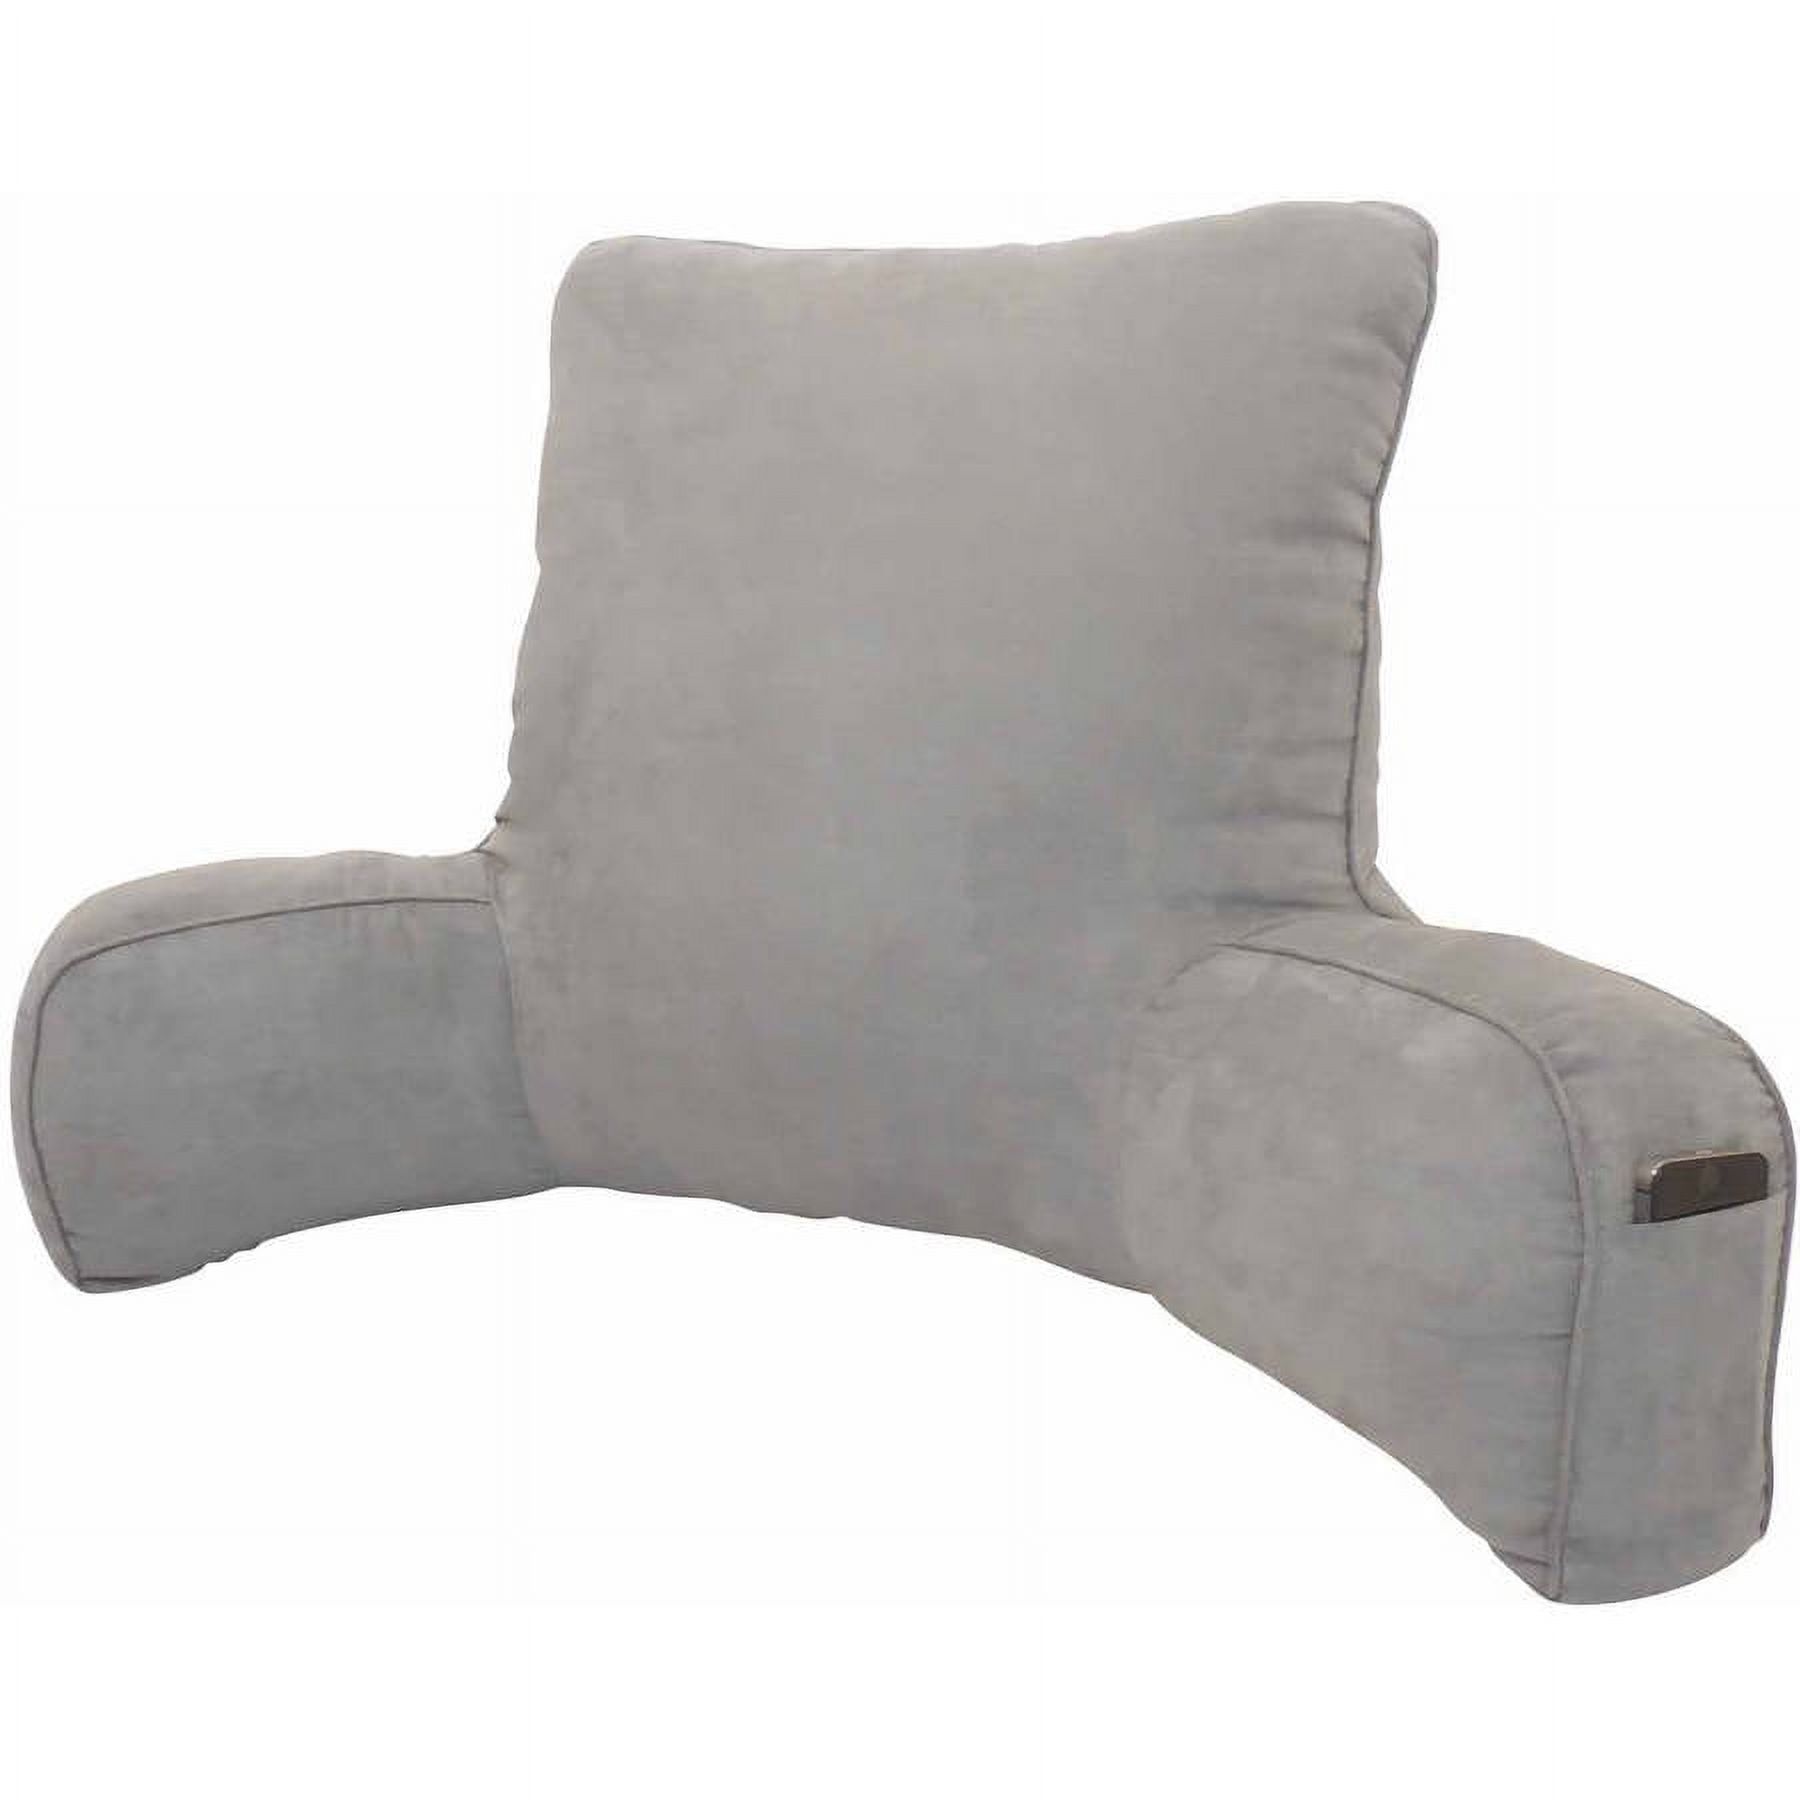 Elements Gray Solid Print Polyester Bed Rest Pillow - image 1 of 5